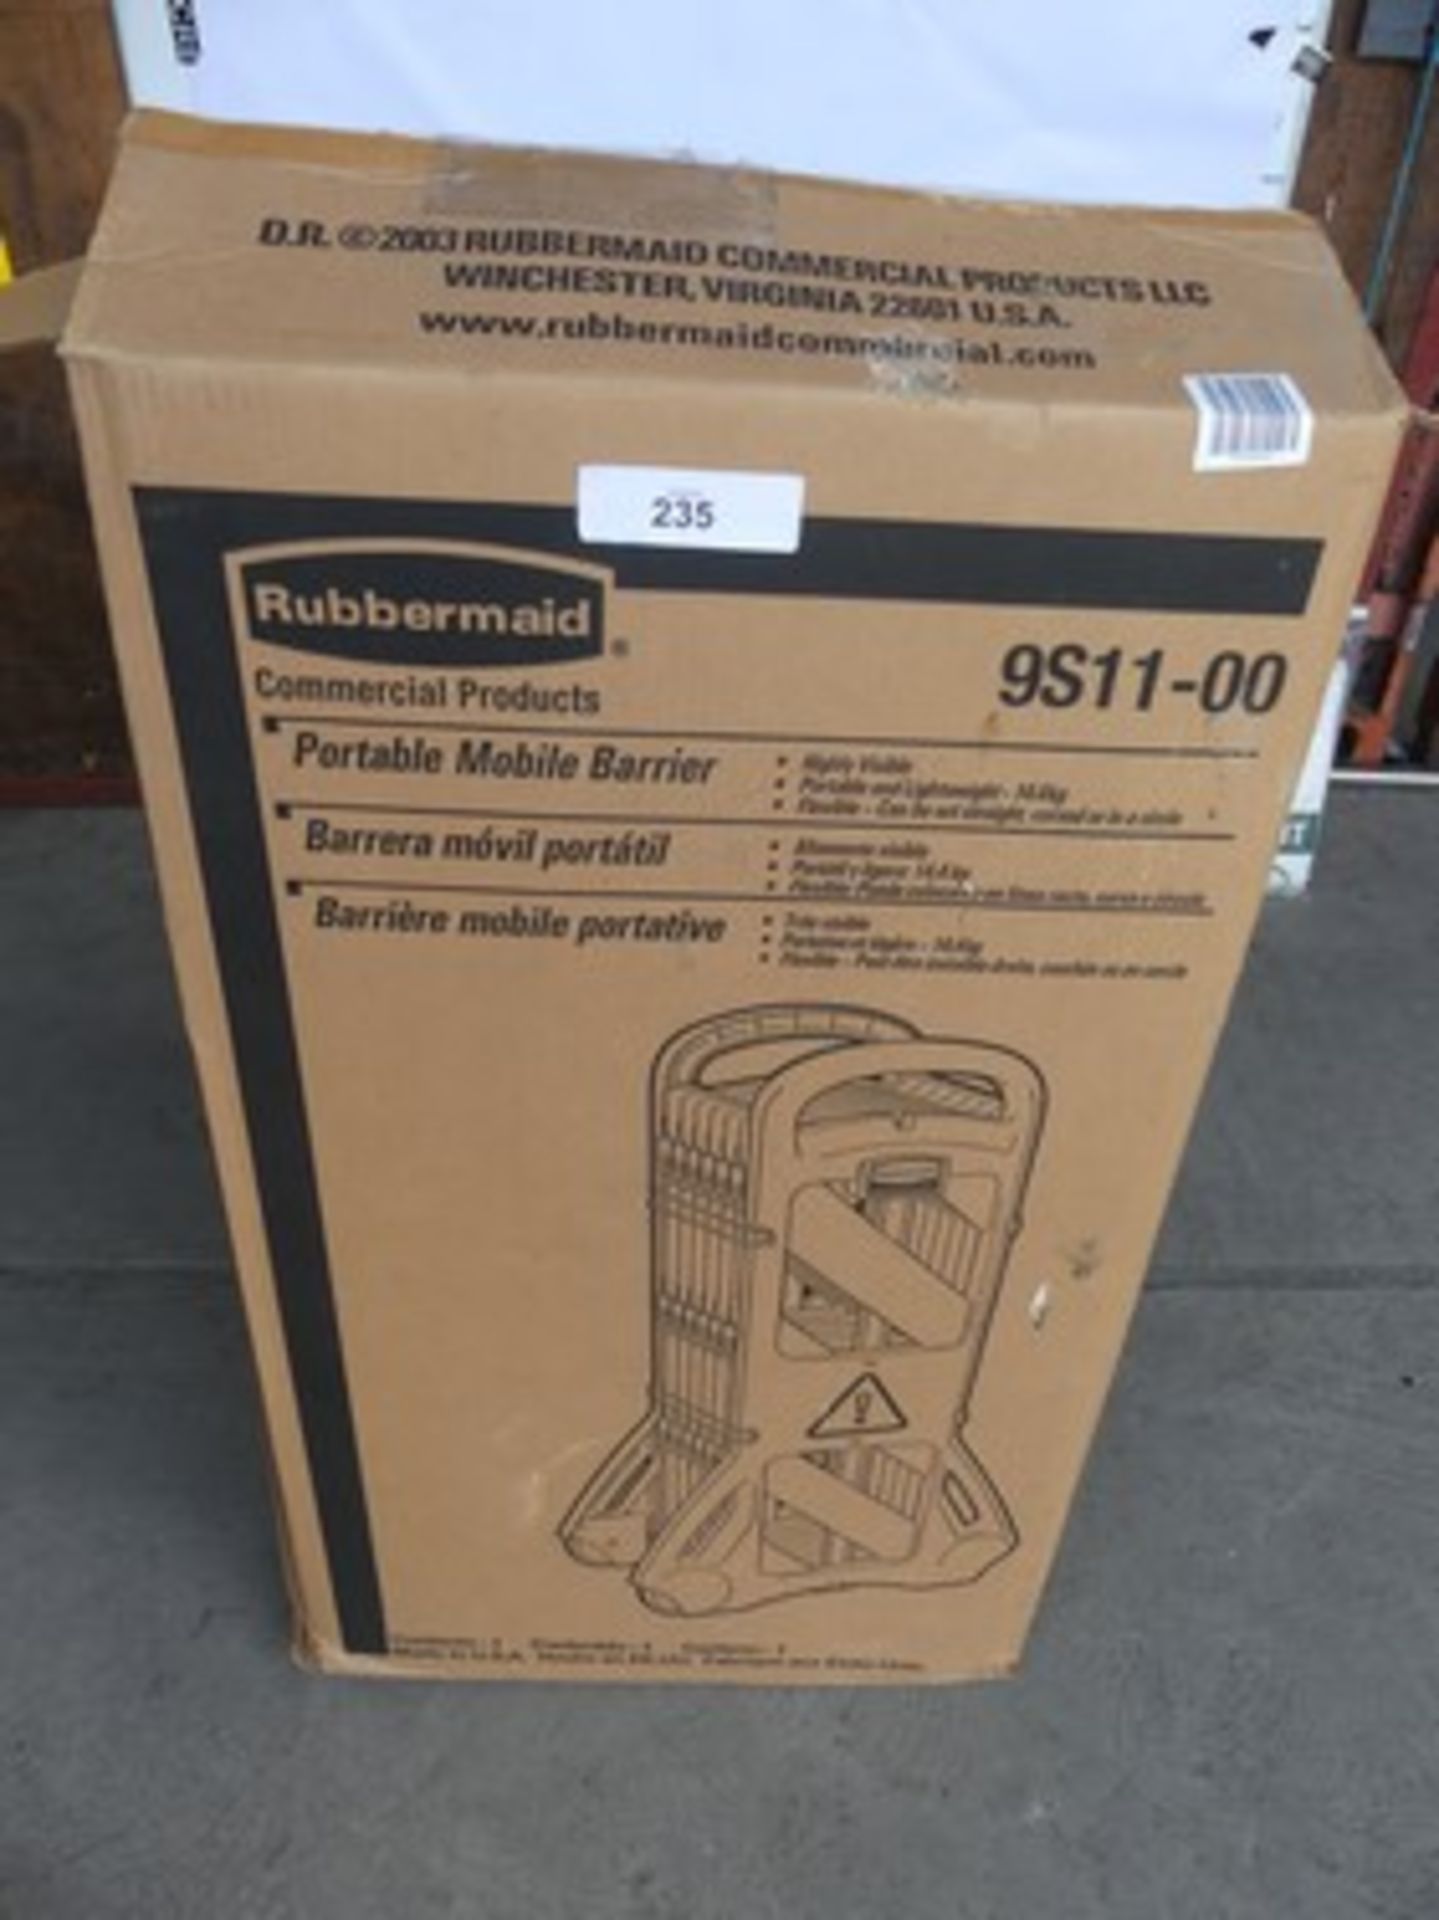 1 x Rubbermaid portable barrier, Model 9511-00 and 1 x metal kick start - New (SW18) - Image 3 of 4